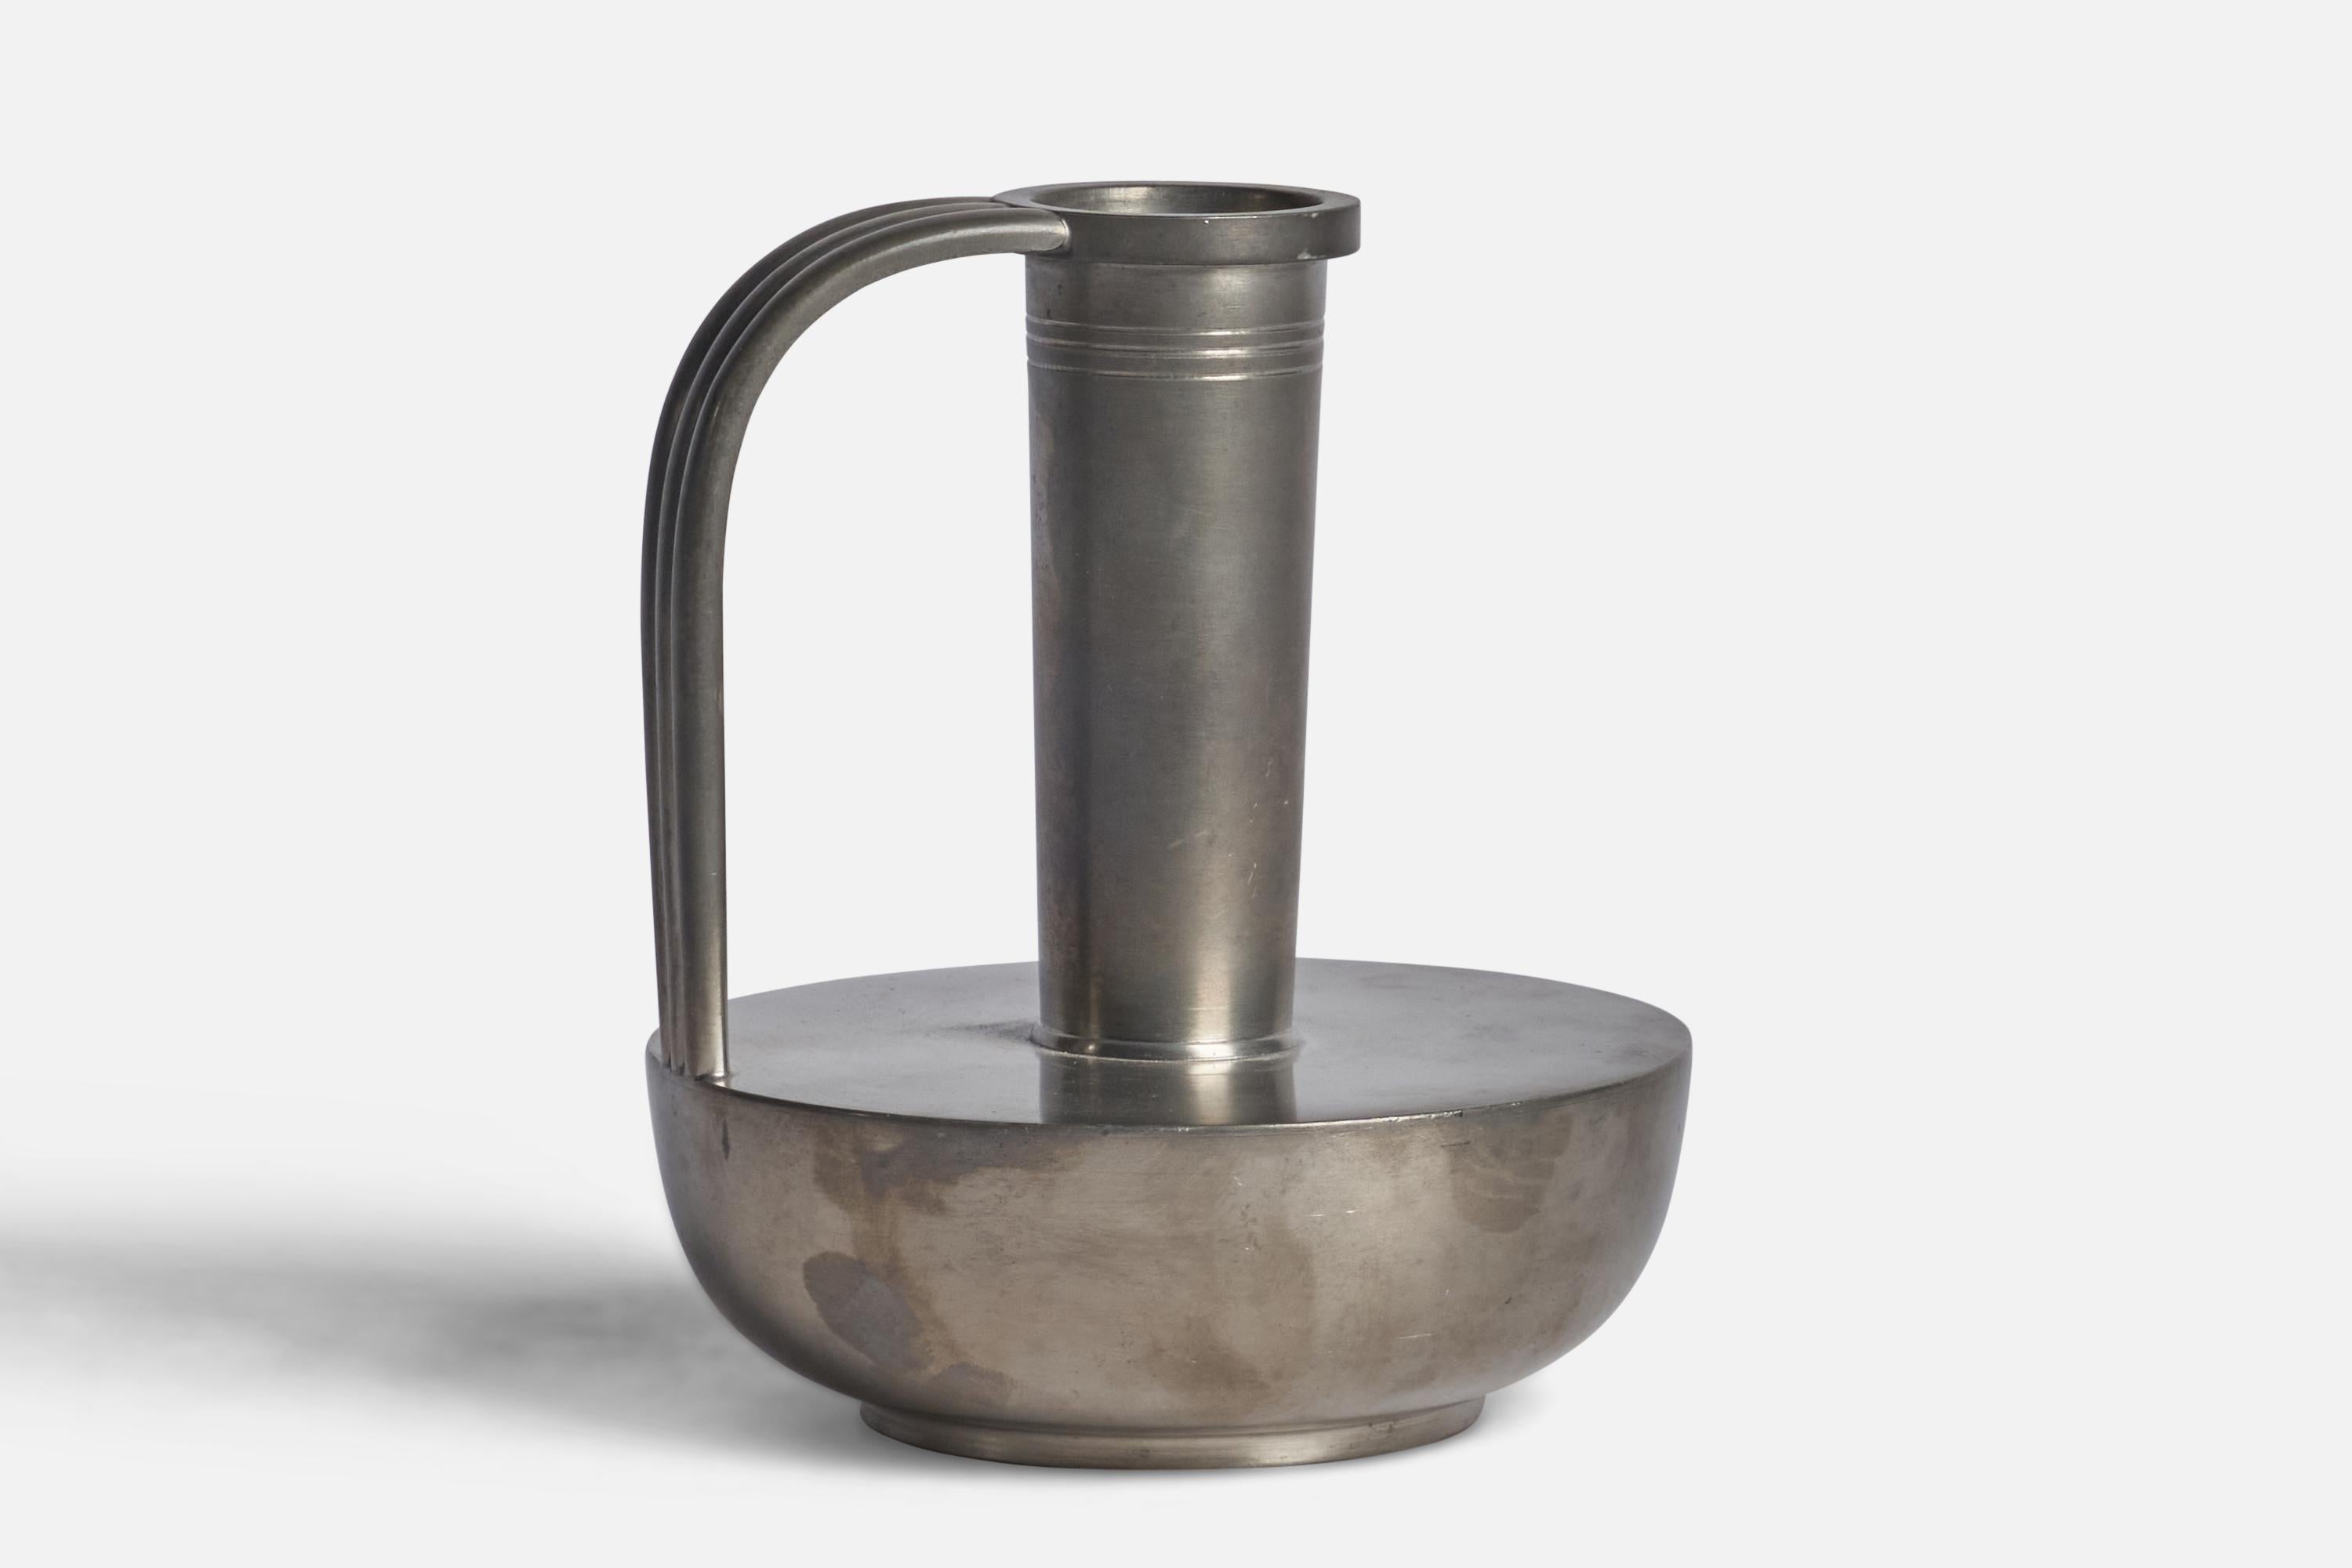 A pewter pitcher designed and produced in Sweden, 1930s.